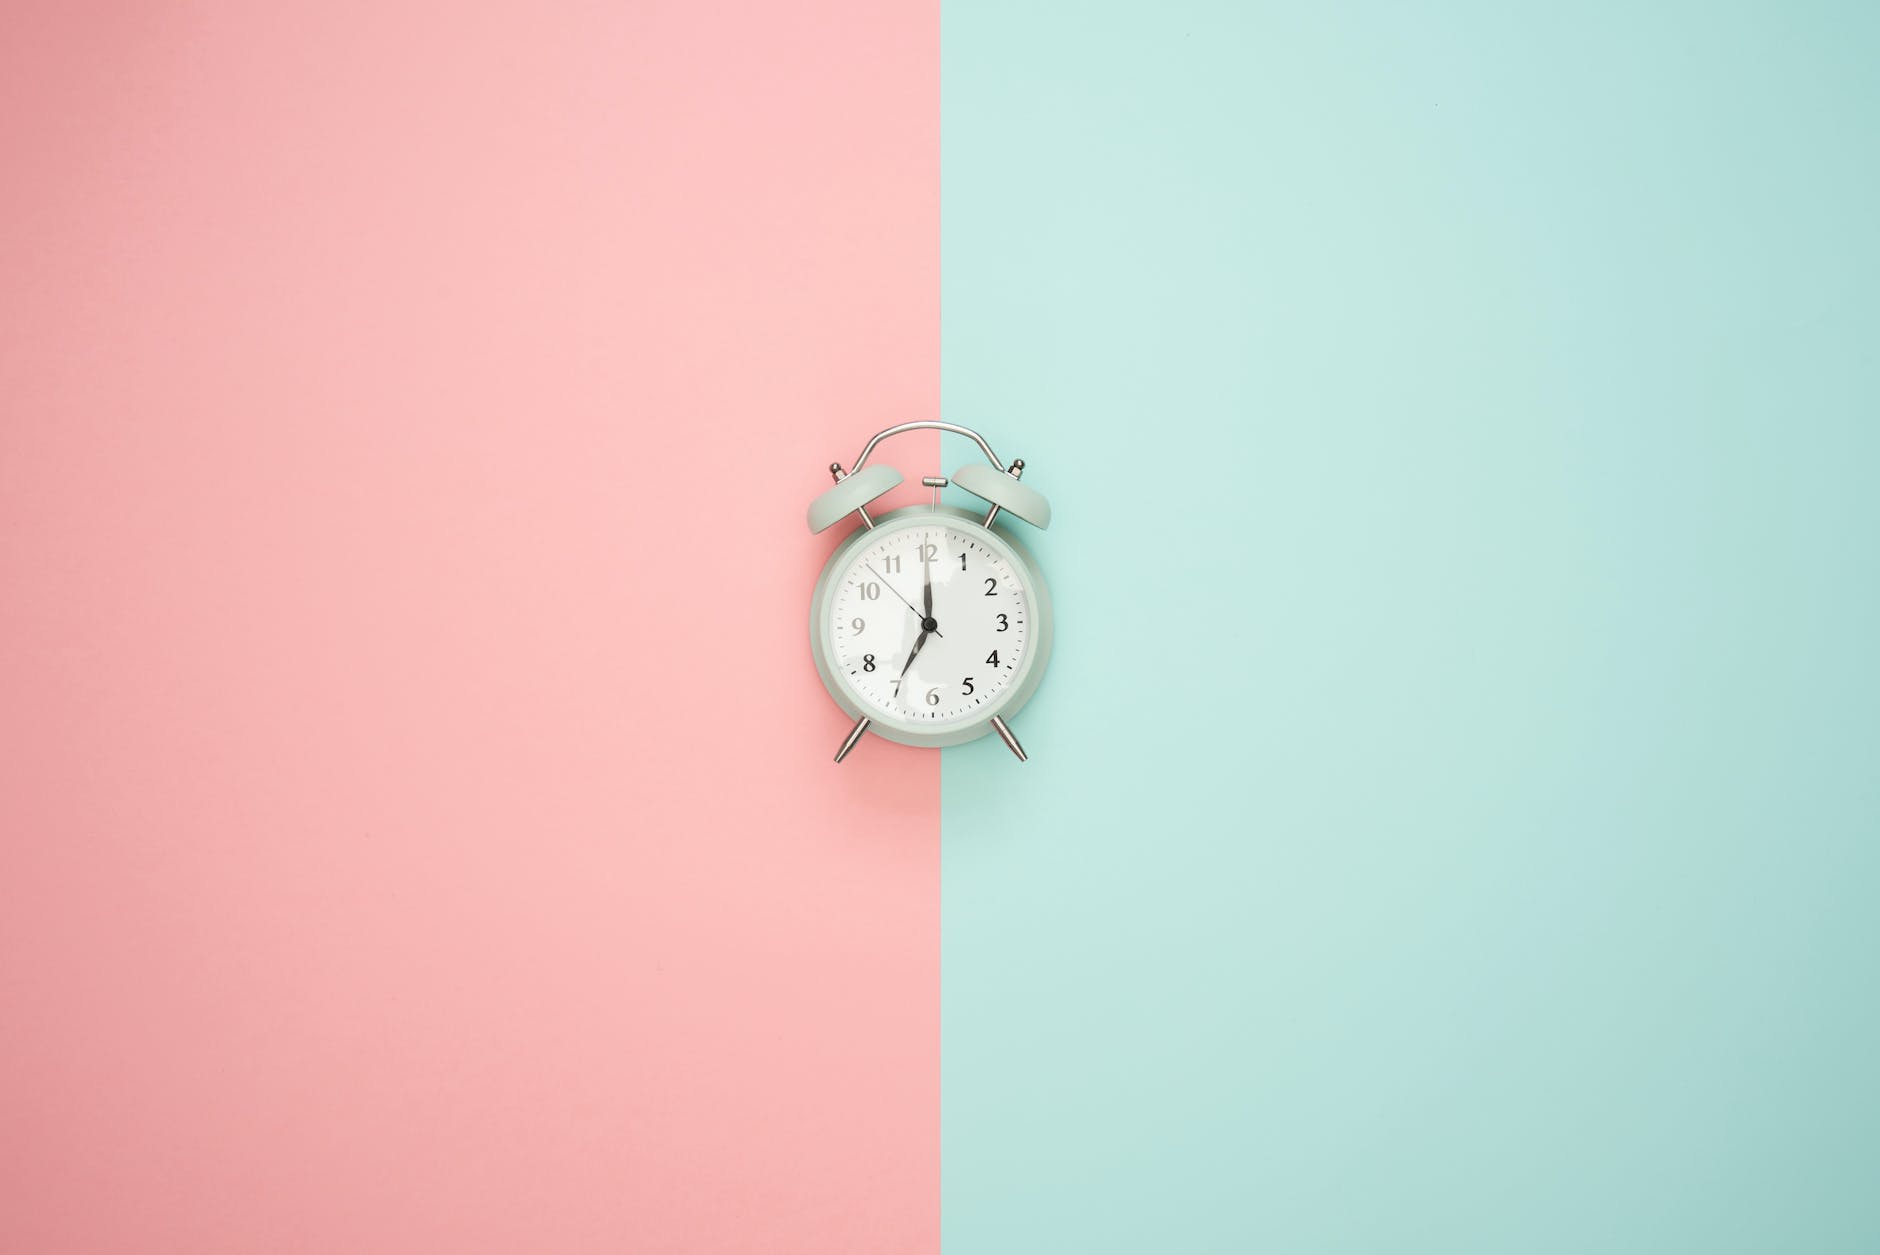 Top 8 Tips for Multiplying Your Productivity in 2023 - Use Time Management Techniques